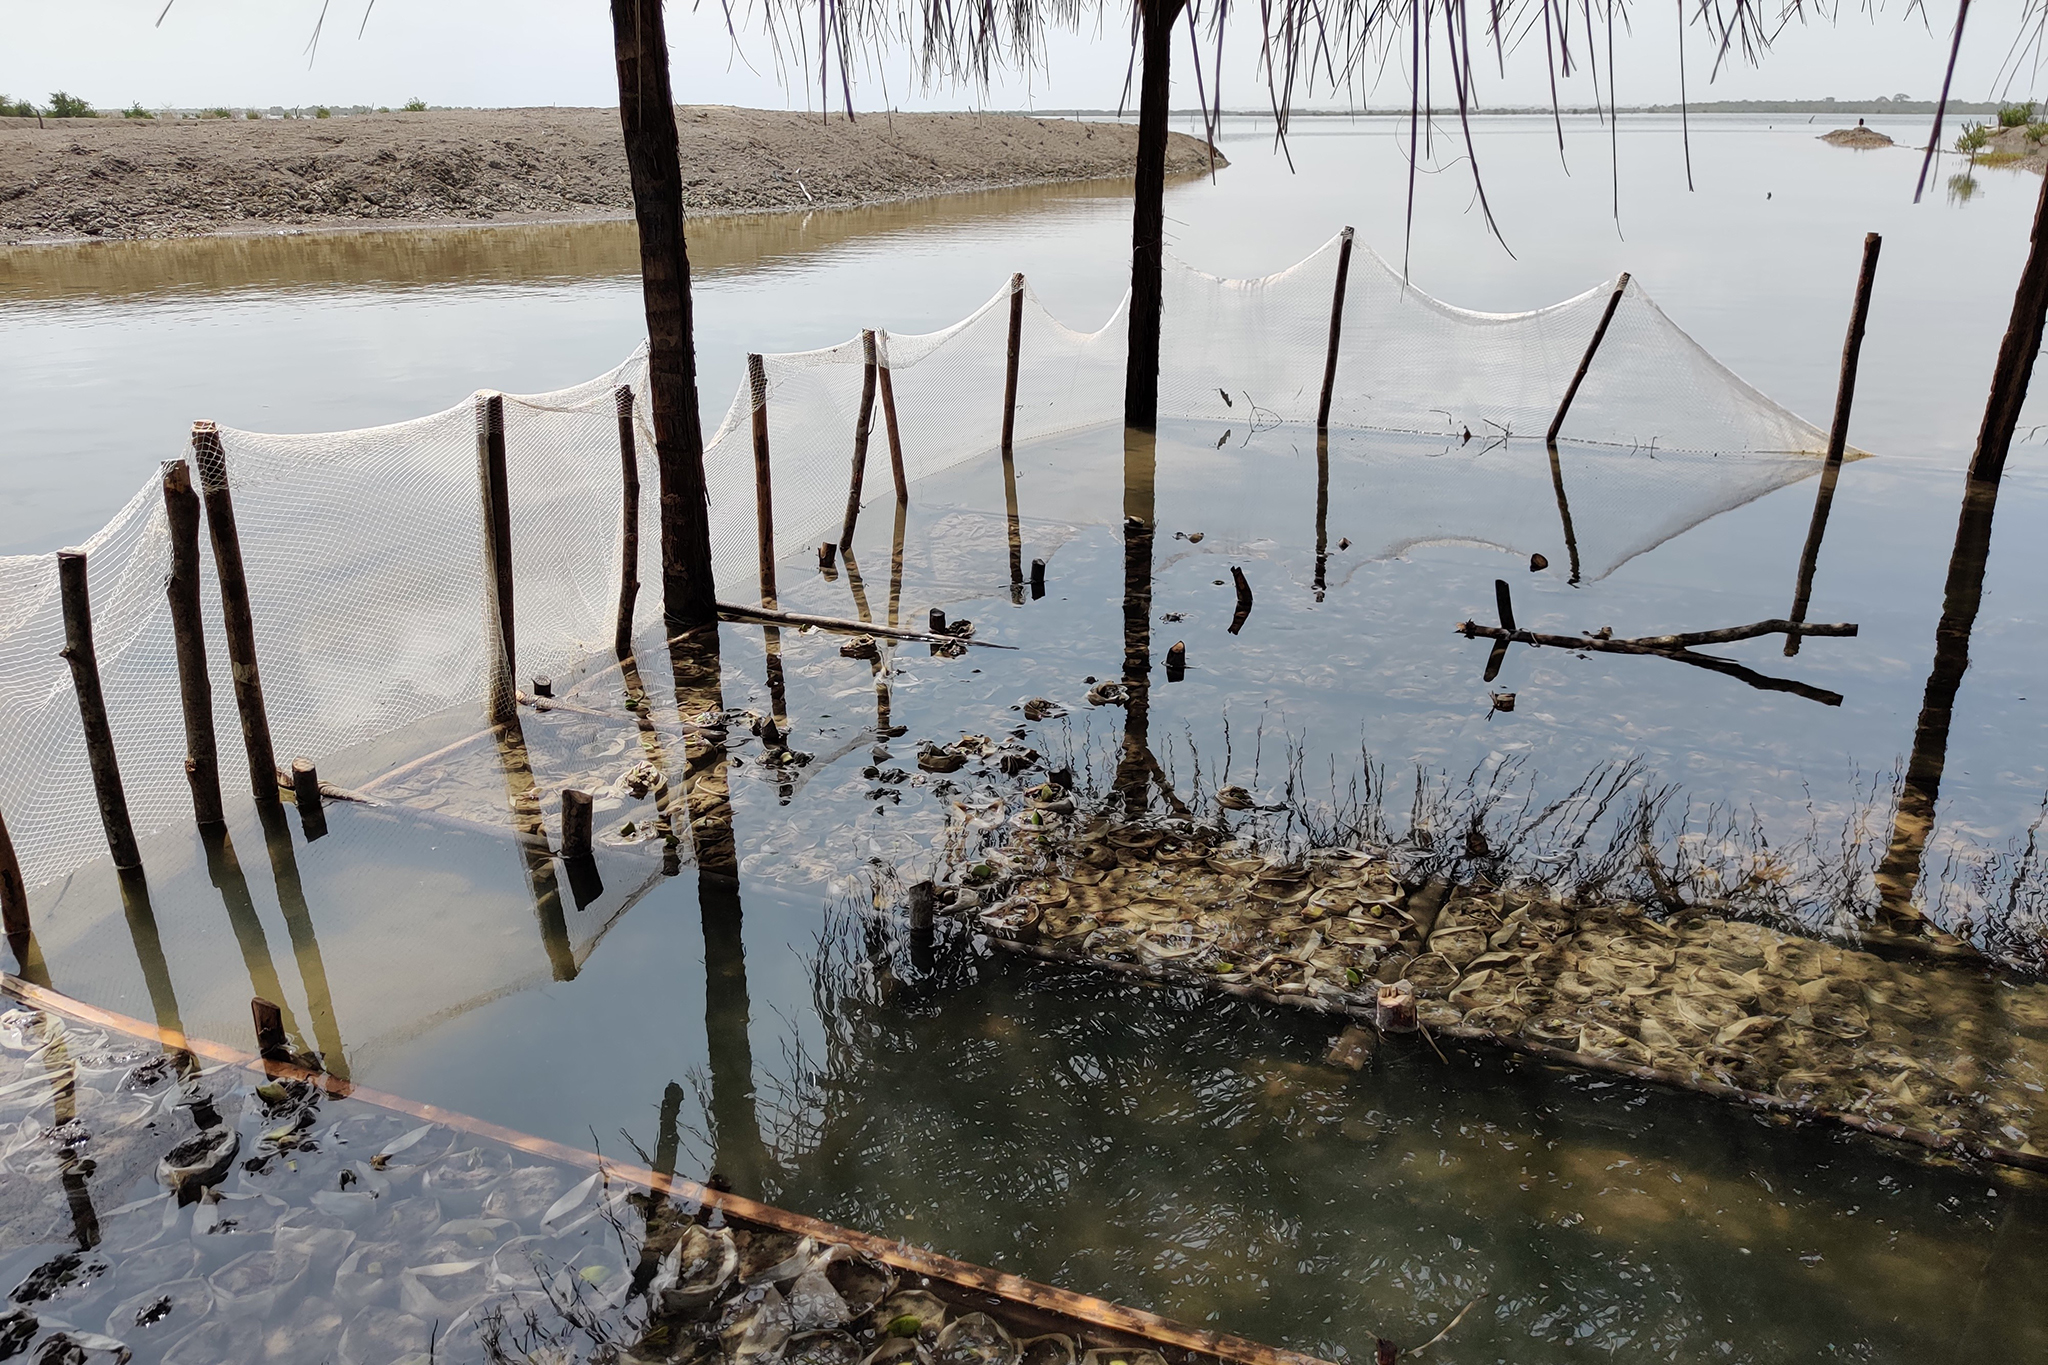 Although the majority of the mangroves planted in the project will be Rhizophora, the Avicennia genus is important here because of its more desirable impact on the salt content of the ecosystem. It is hard to find Avicennia seeds because of climate change and other factors, so they are raised in tidal nurseries that mimic local conditions to support survival. © OS, WeForest